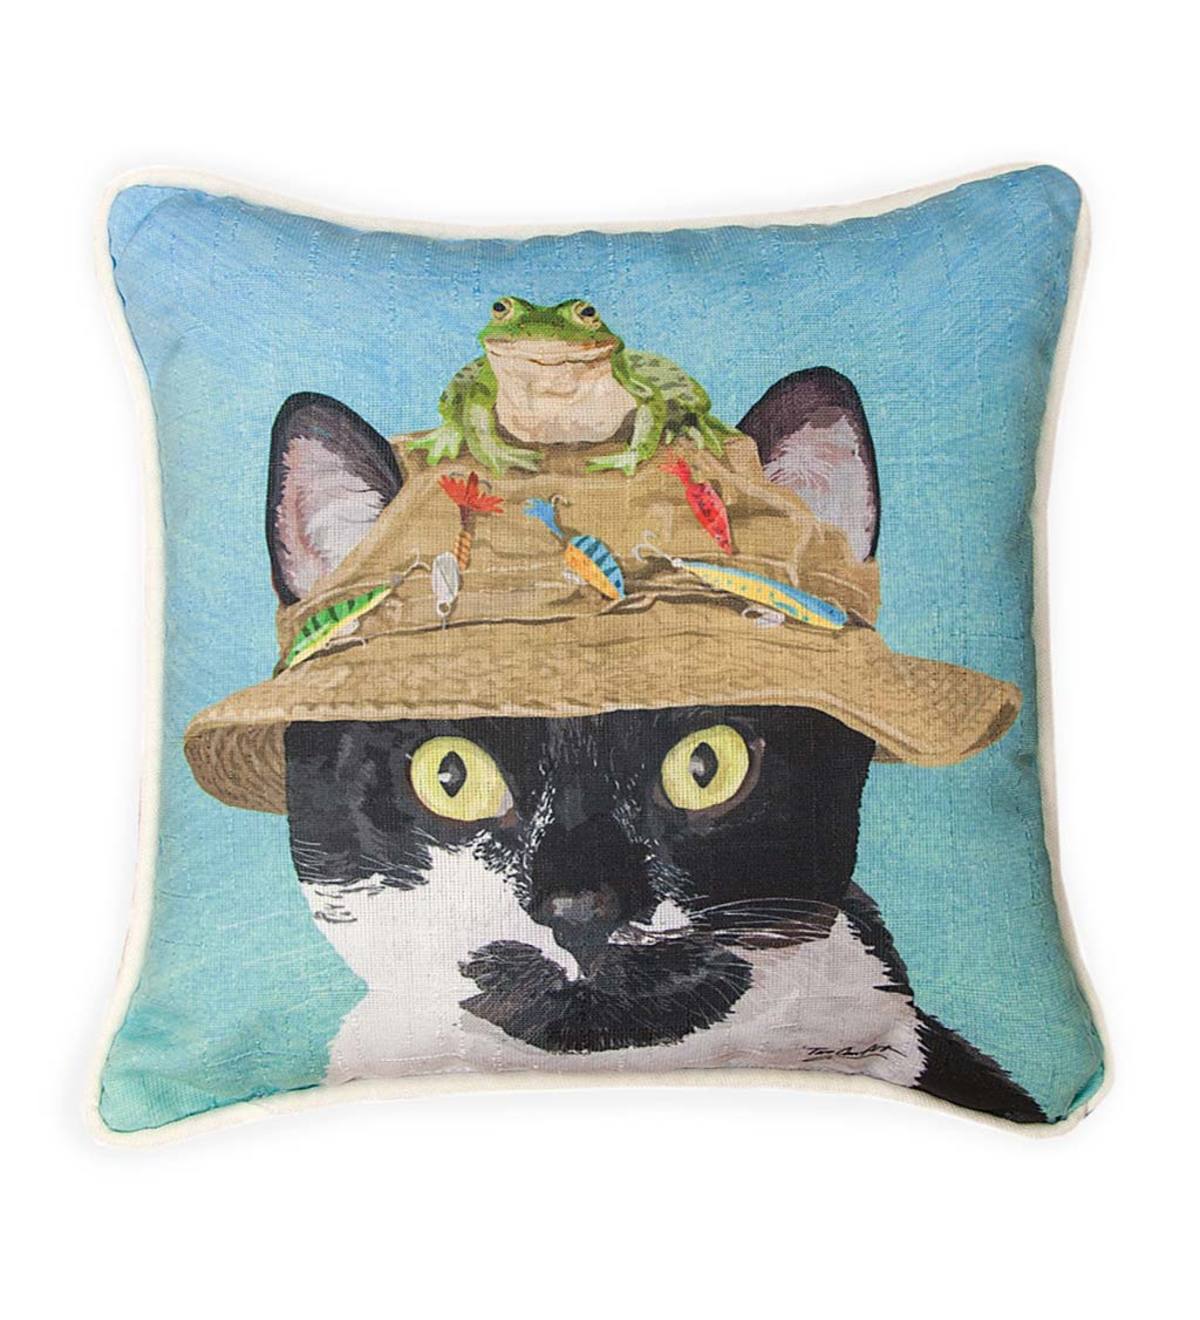 Fisherman Cat with Frog Throw Pillow